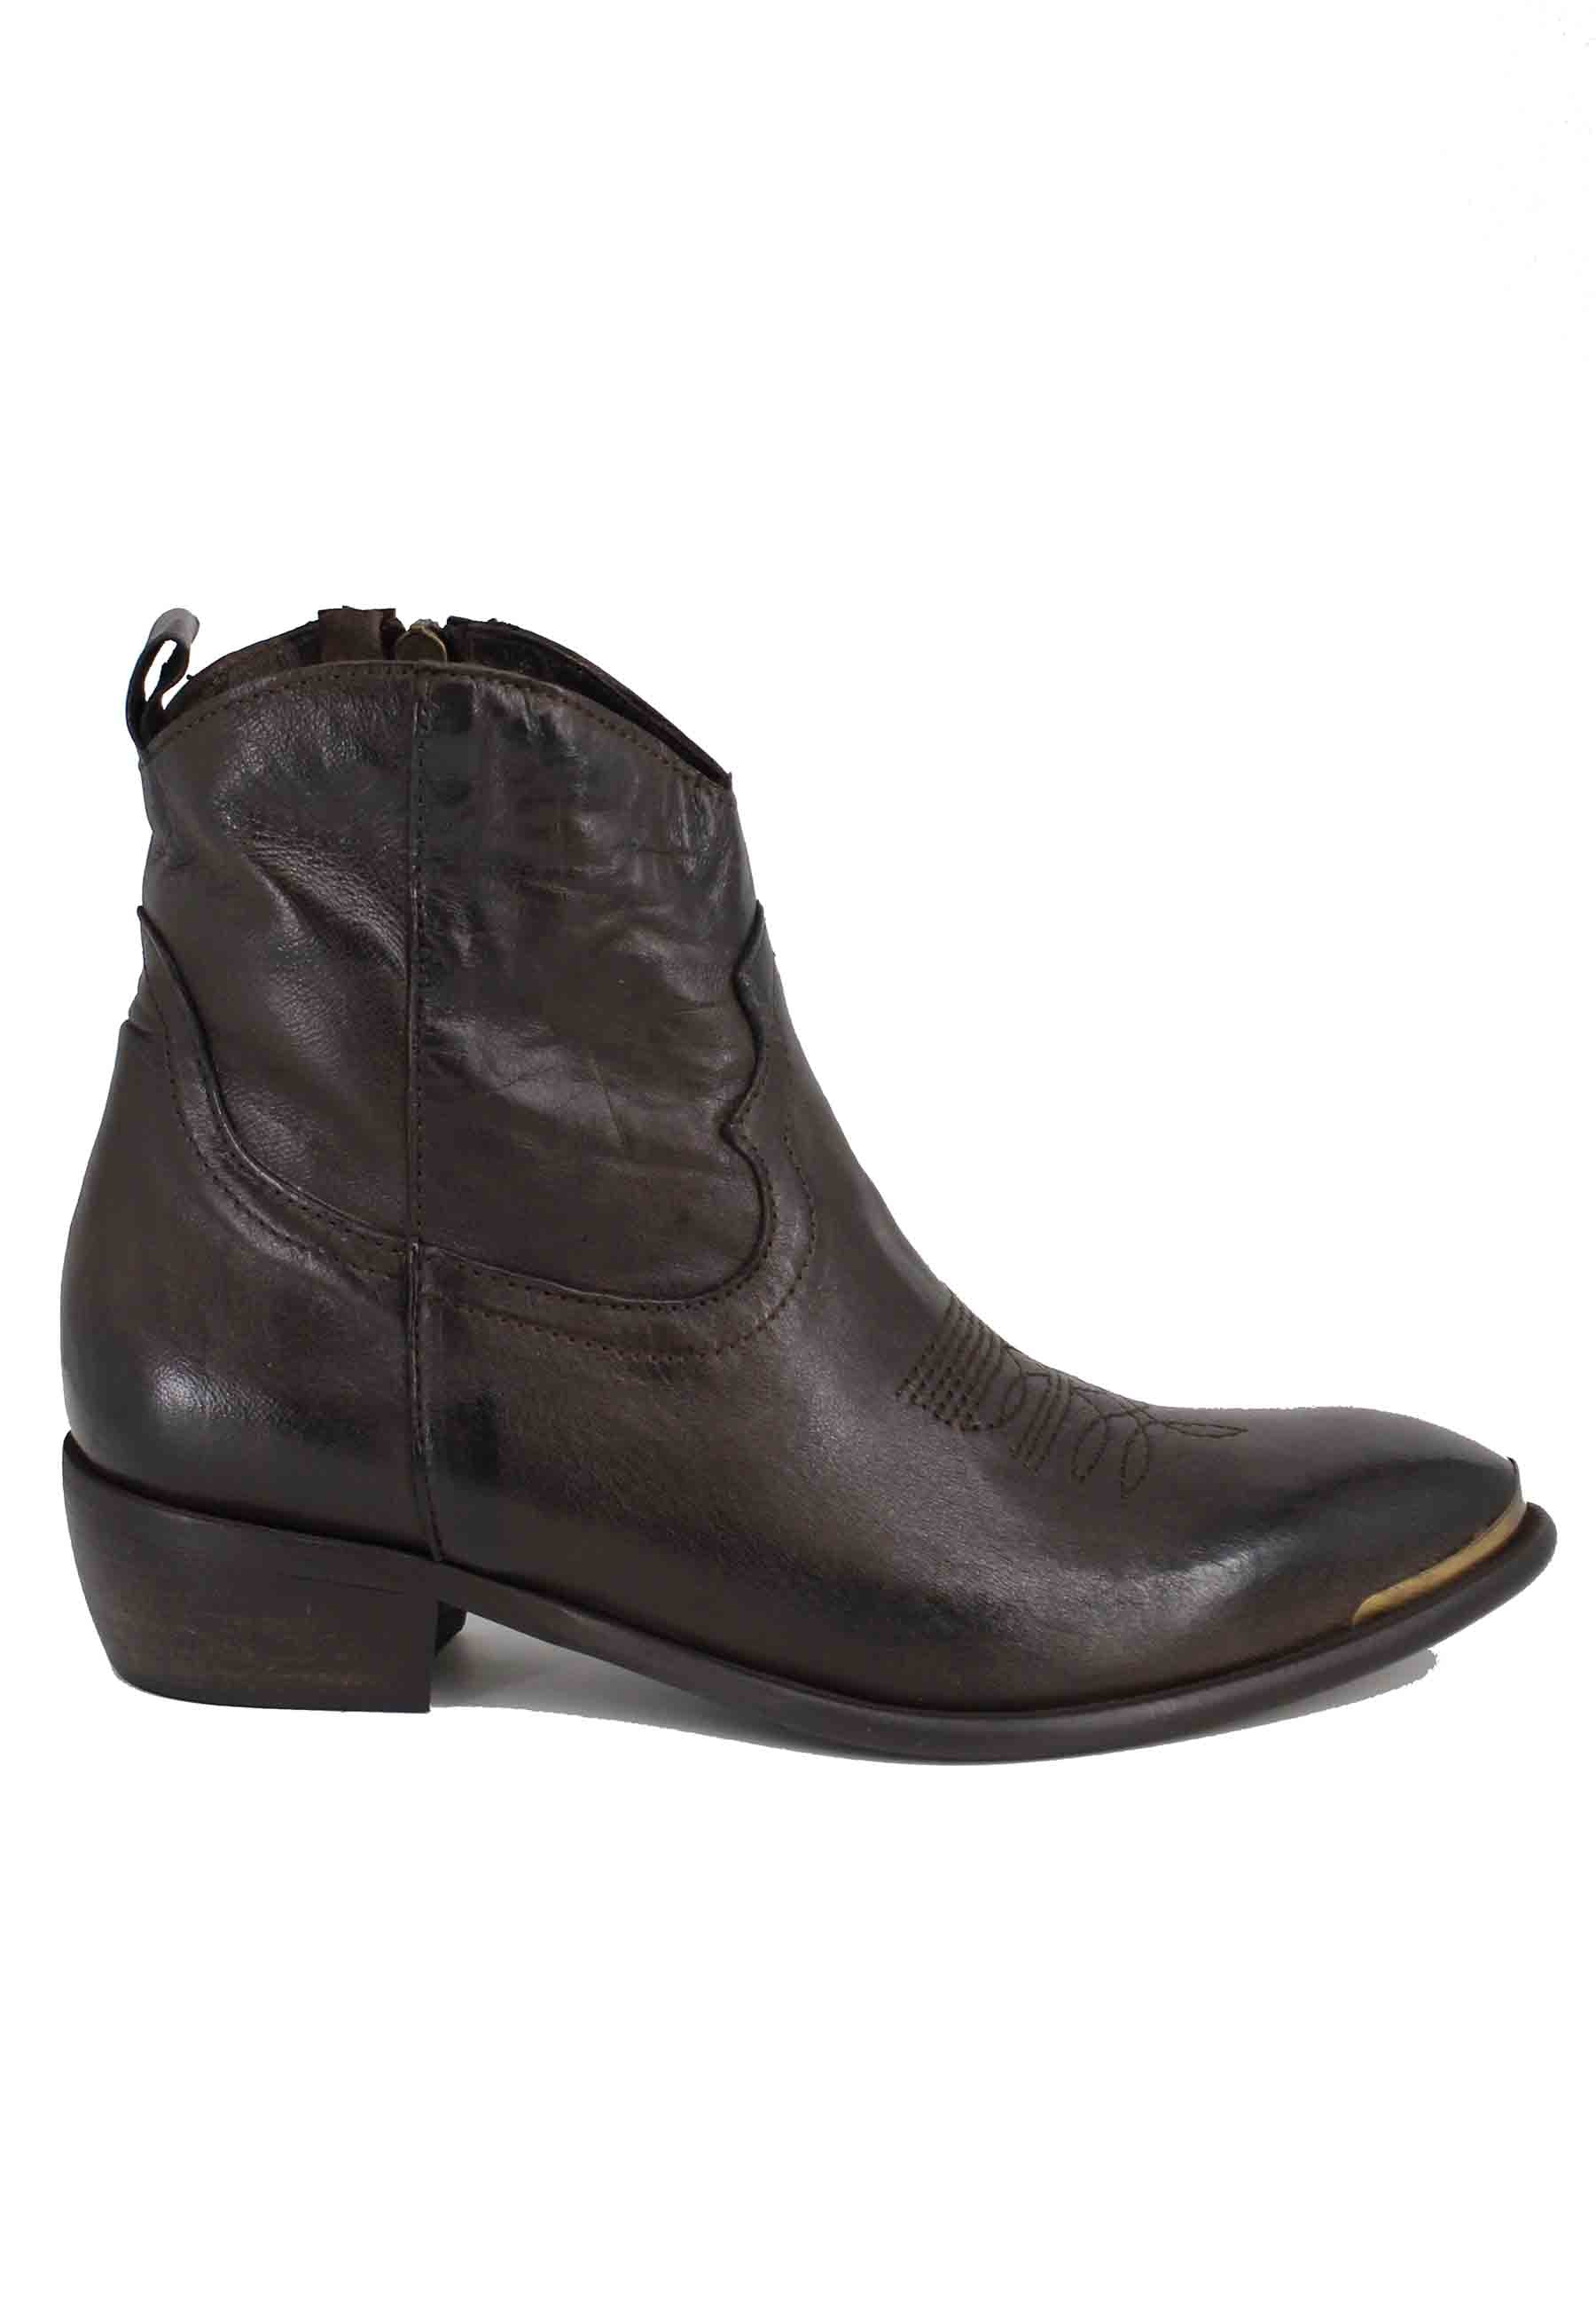 Women's Texan boots in dark brown leather with toe cap